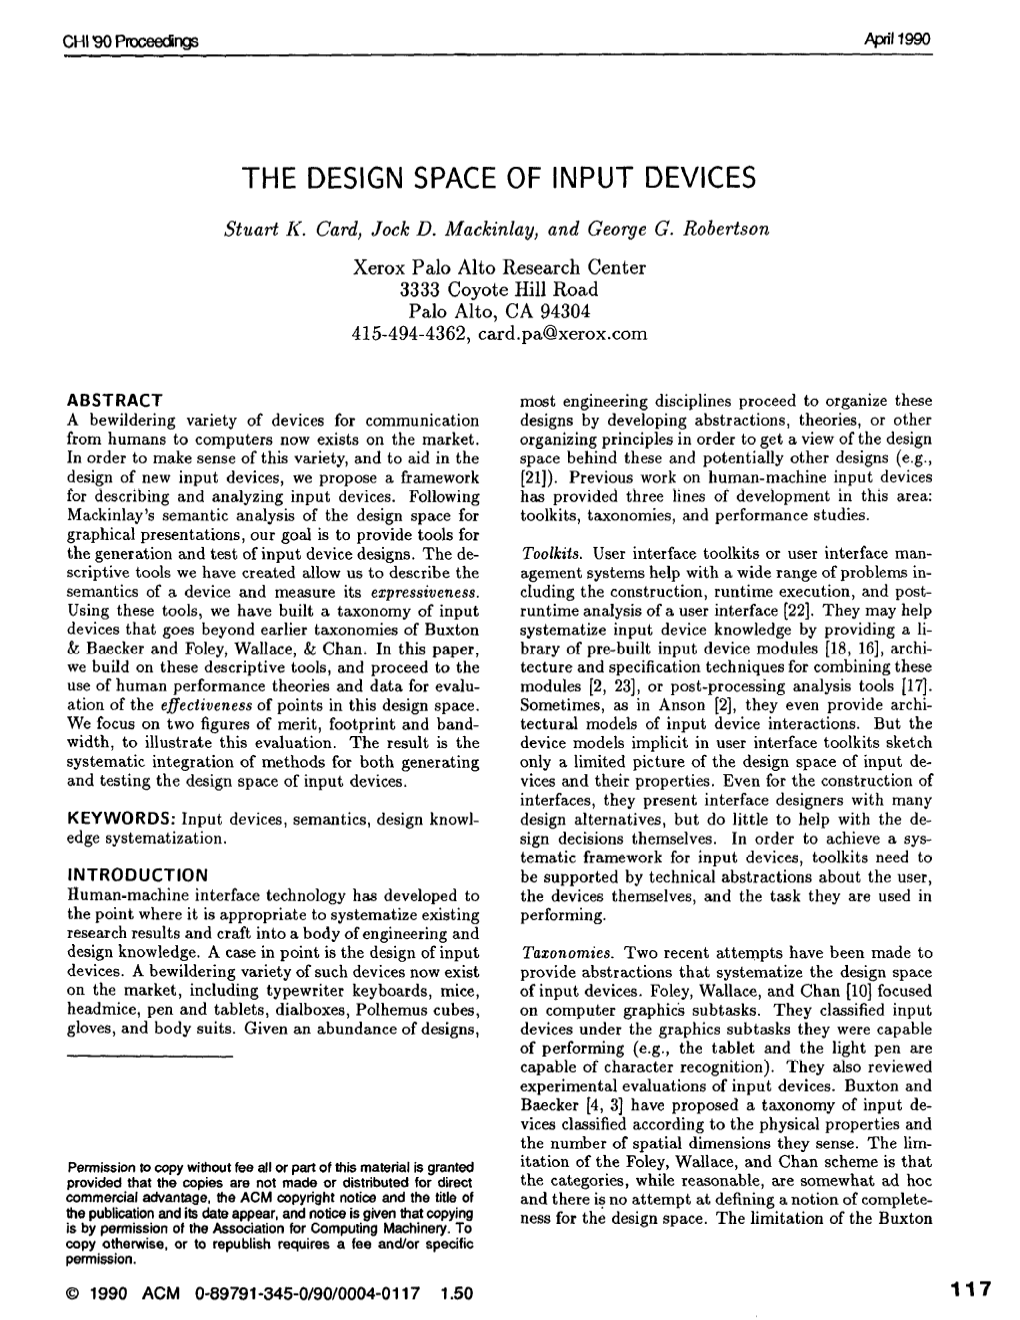 The Design Space of Input Devices